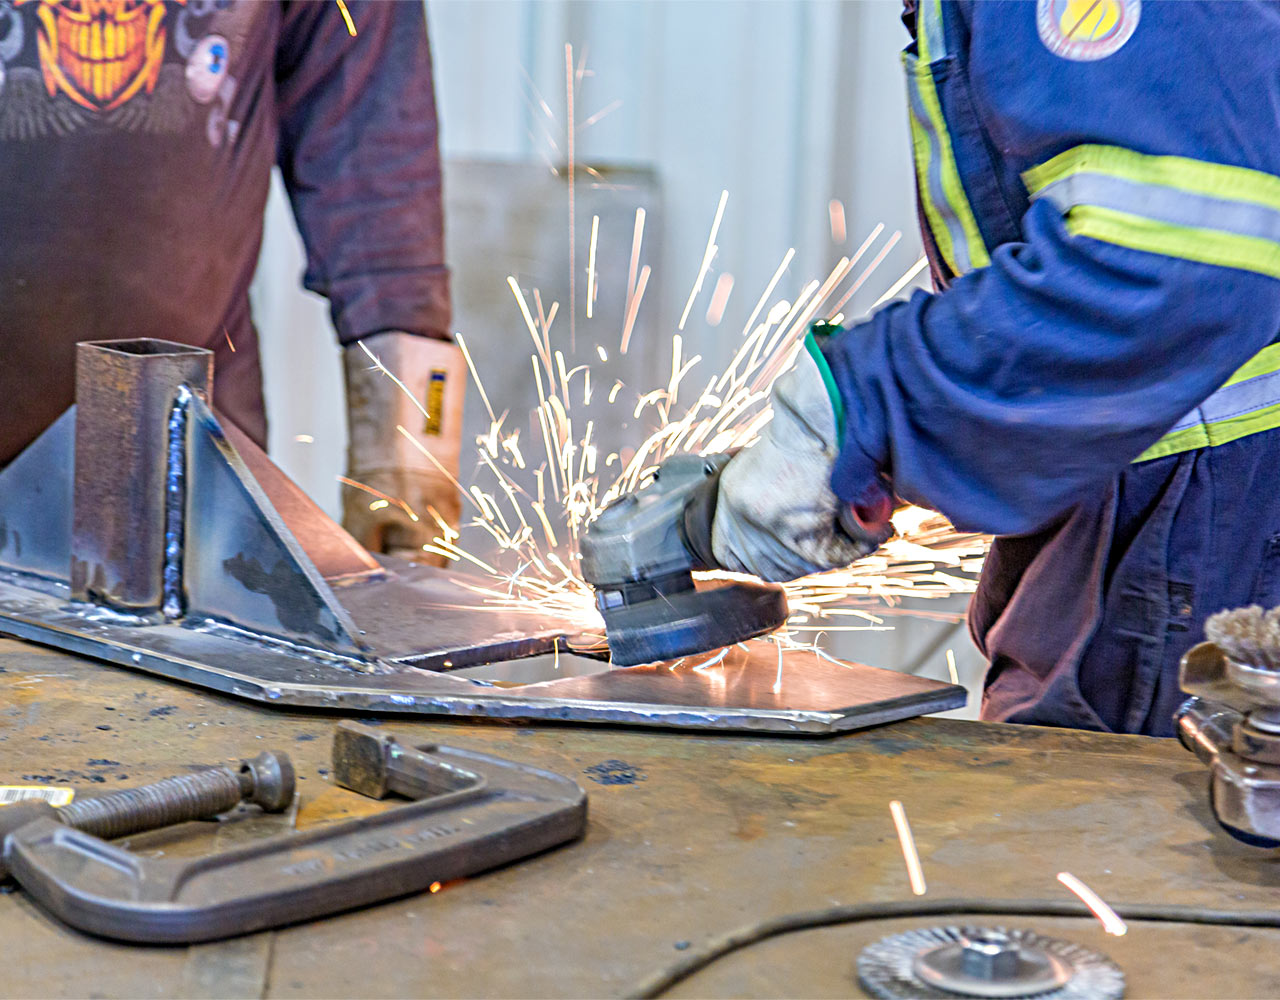 Two Men's Hands Welding With Sparks